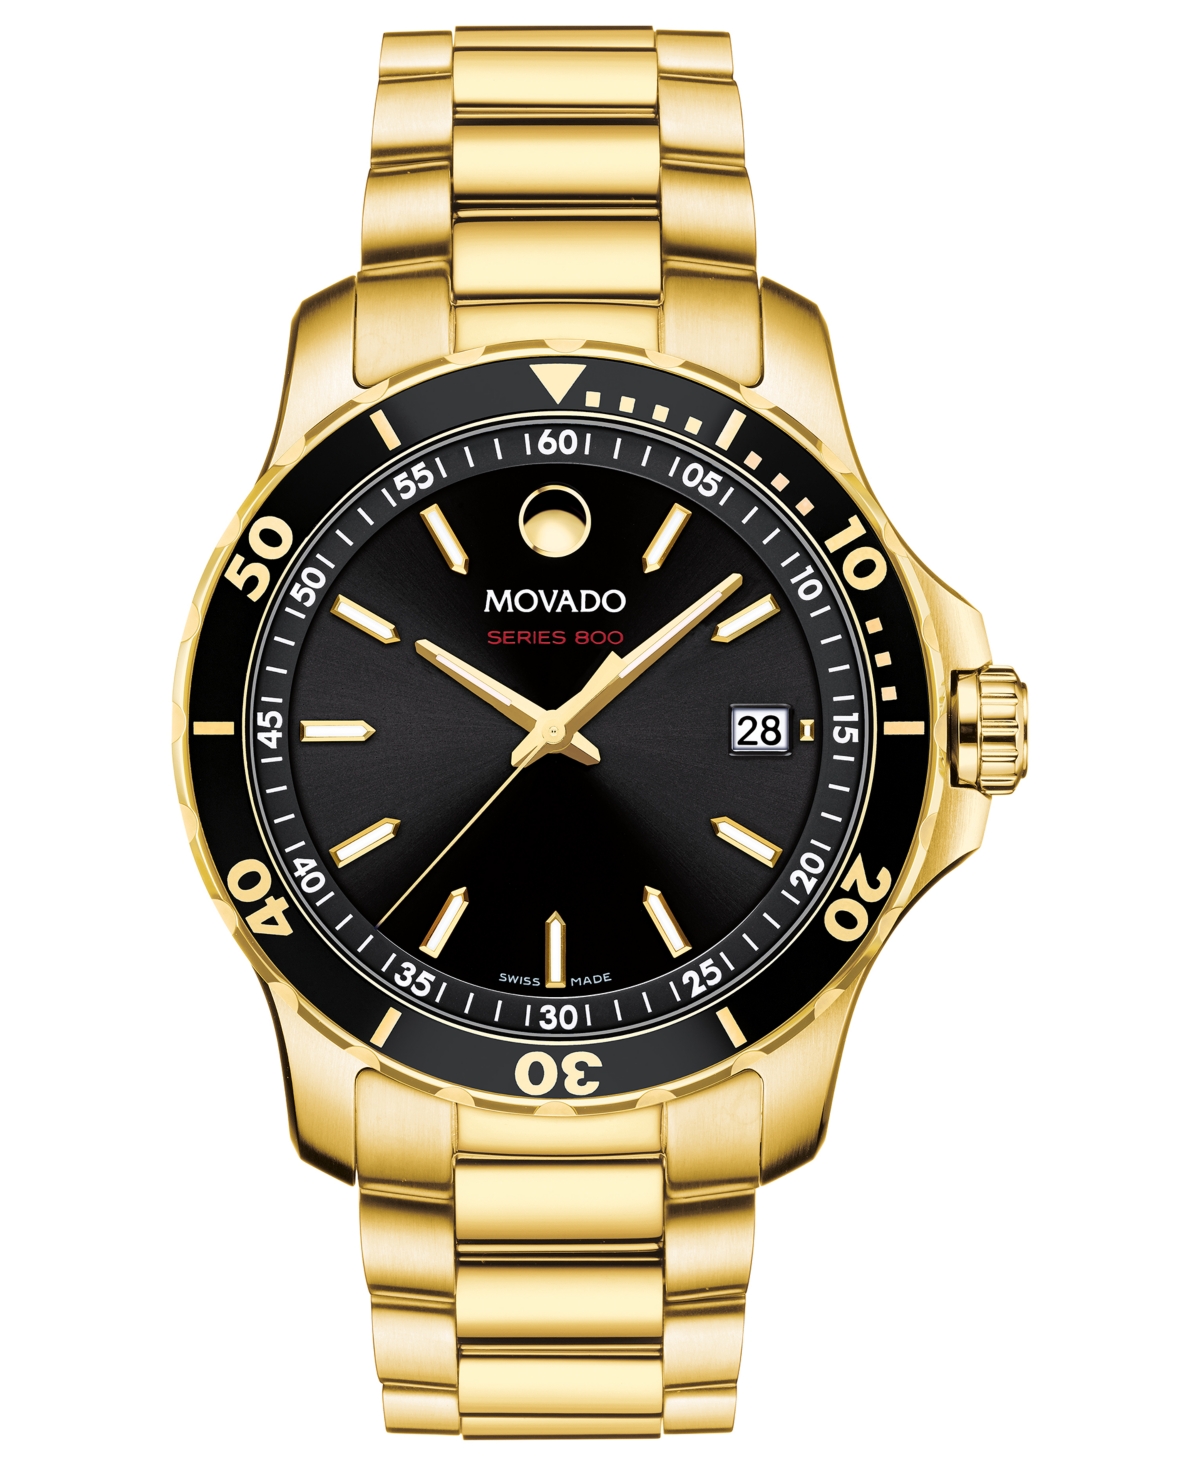 Movado Men's Swiss Series 800 Gold-tone Pvd Stainless Steel Bracelet Diver Watch 40mm